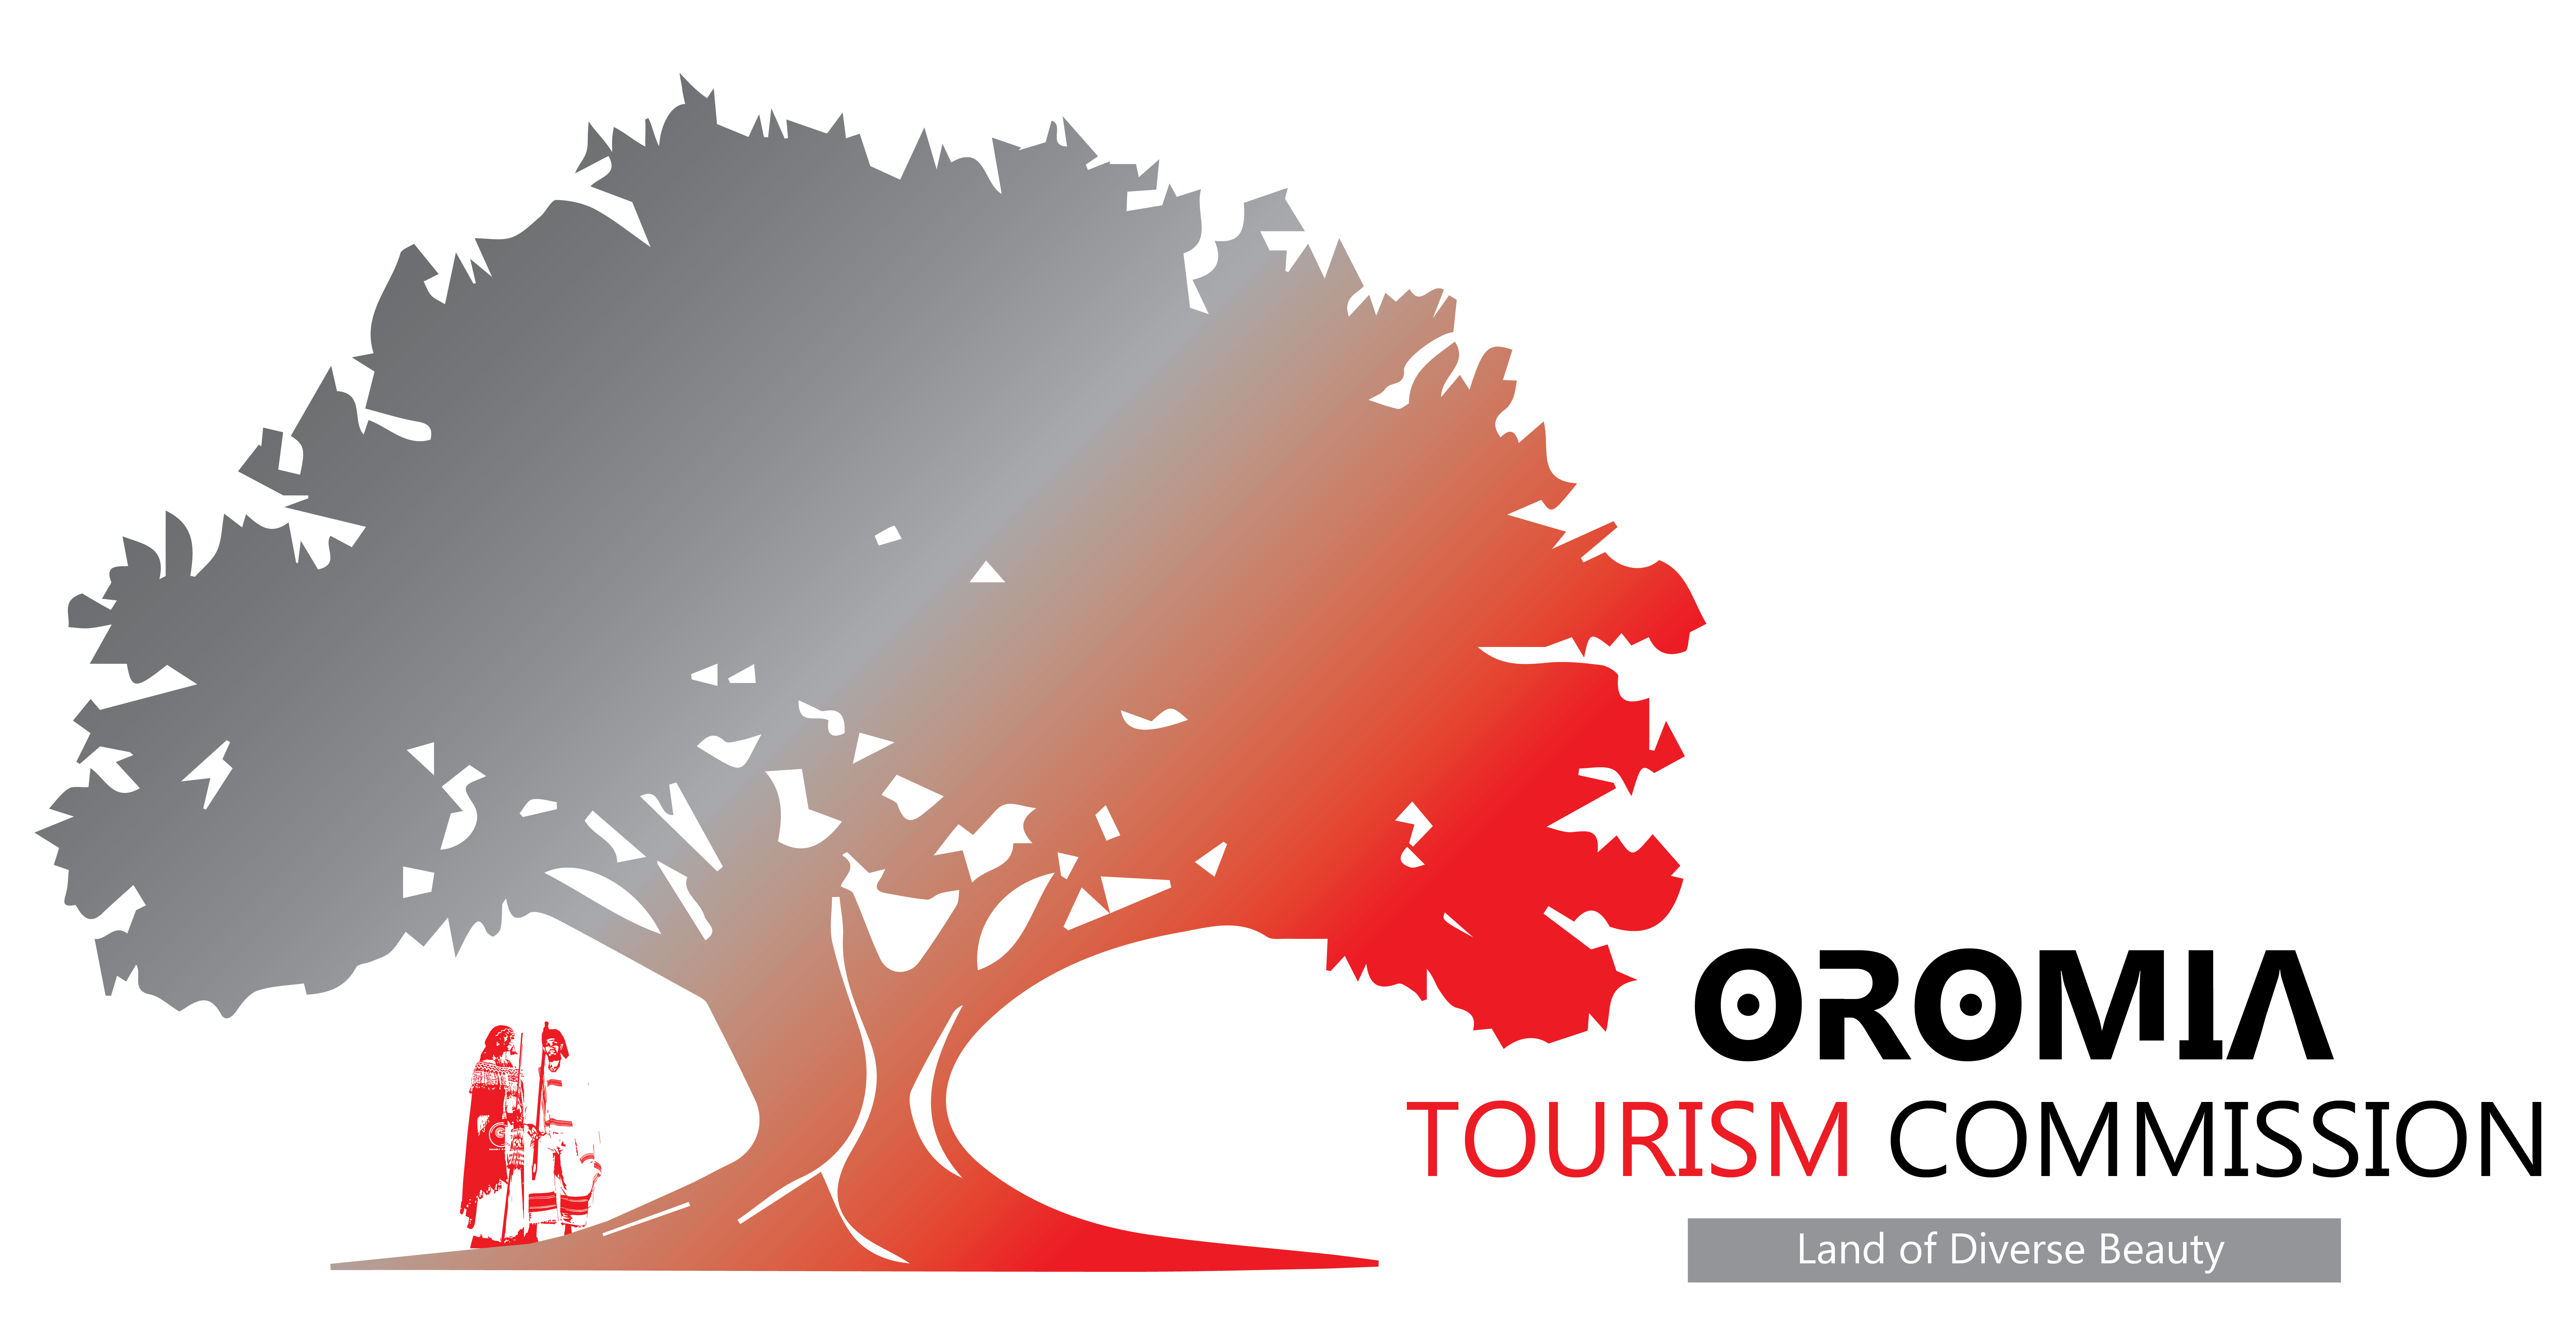 https://www.oromiatourismcommission.et/wp-content/uploads/2018/08/Travelicious-logo-footer.png